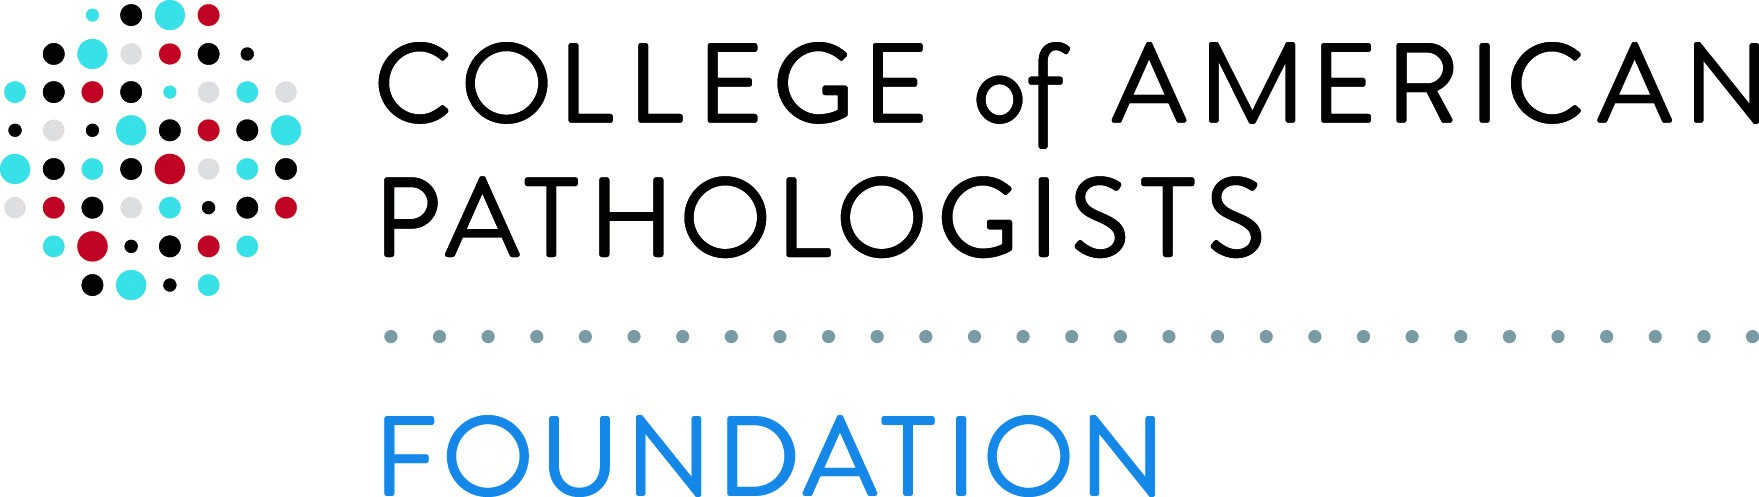 CAP Foundation Grants and Awards Application Site logo